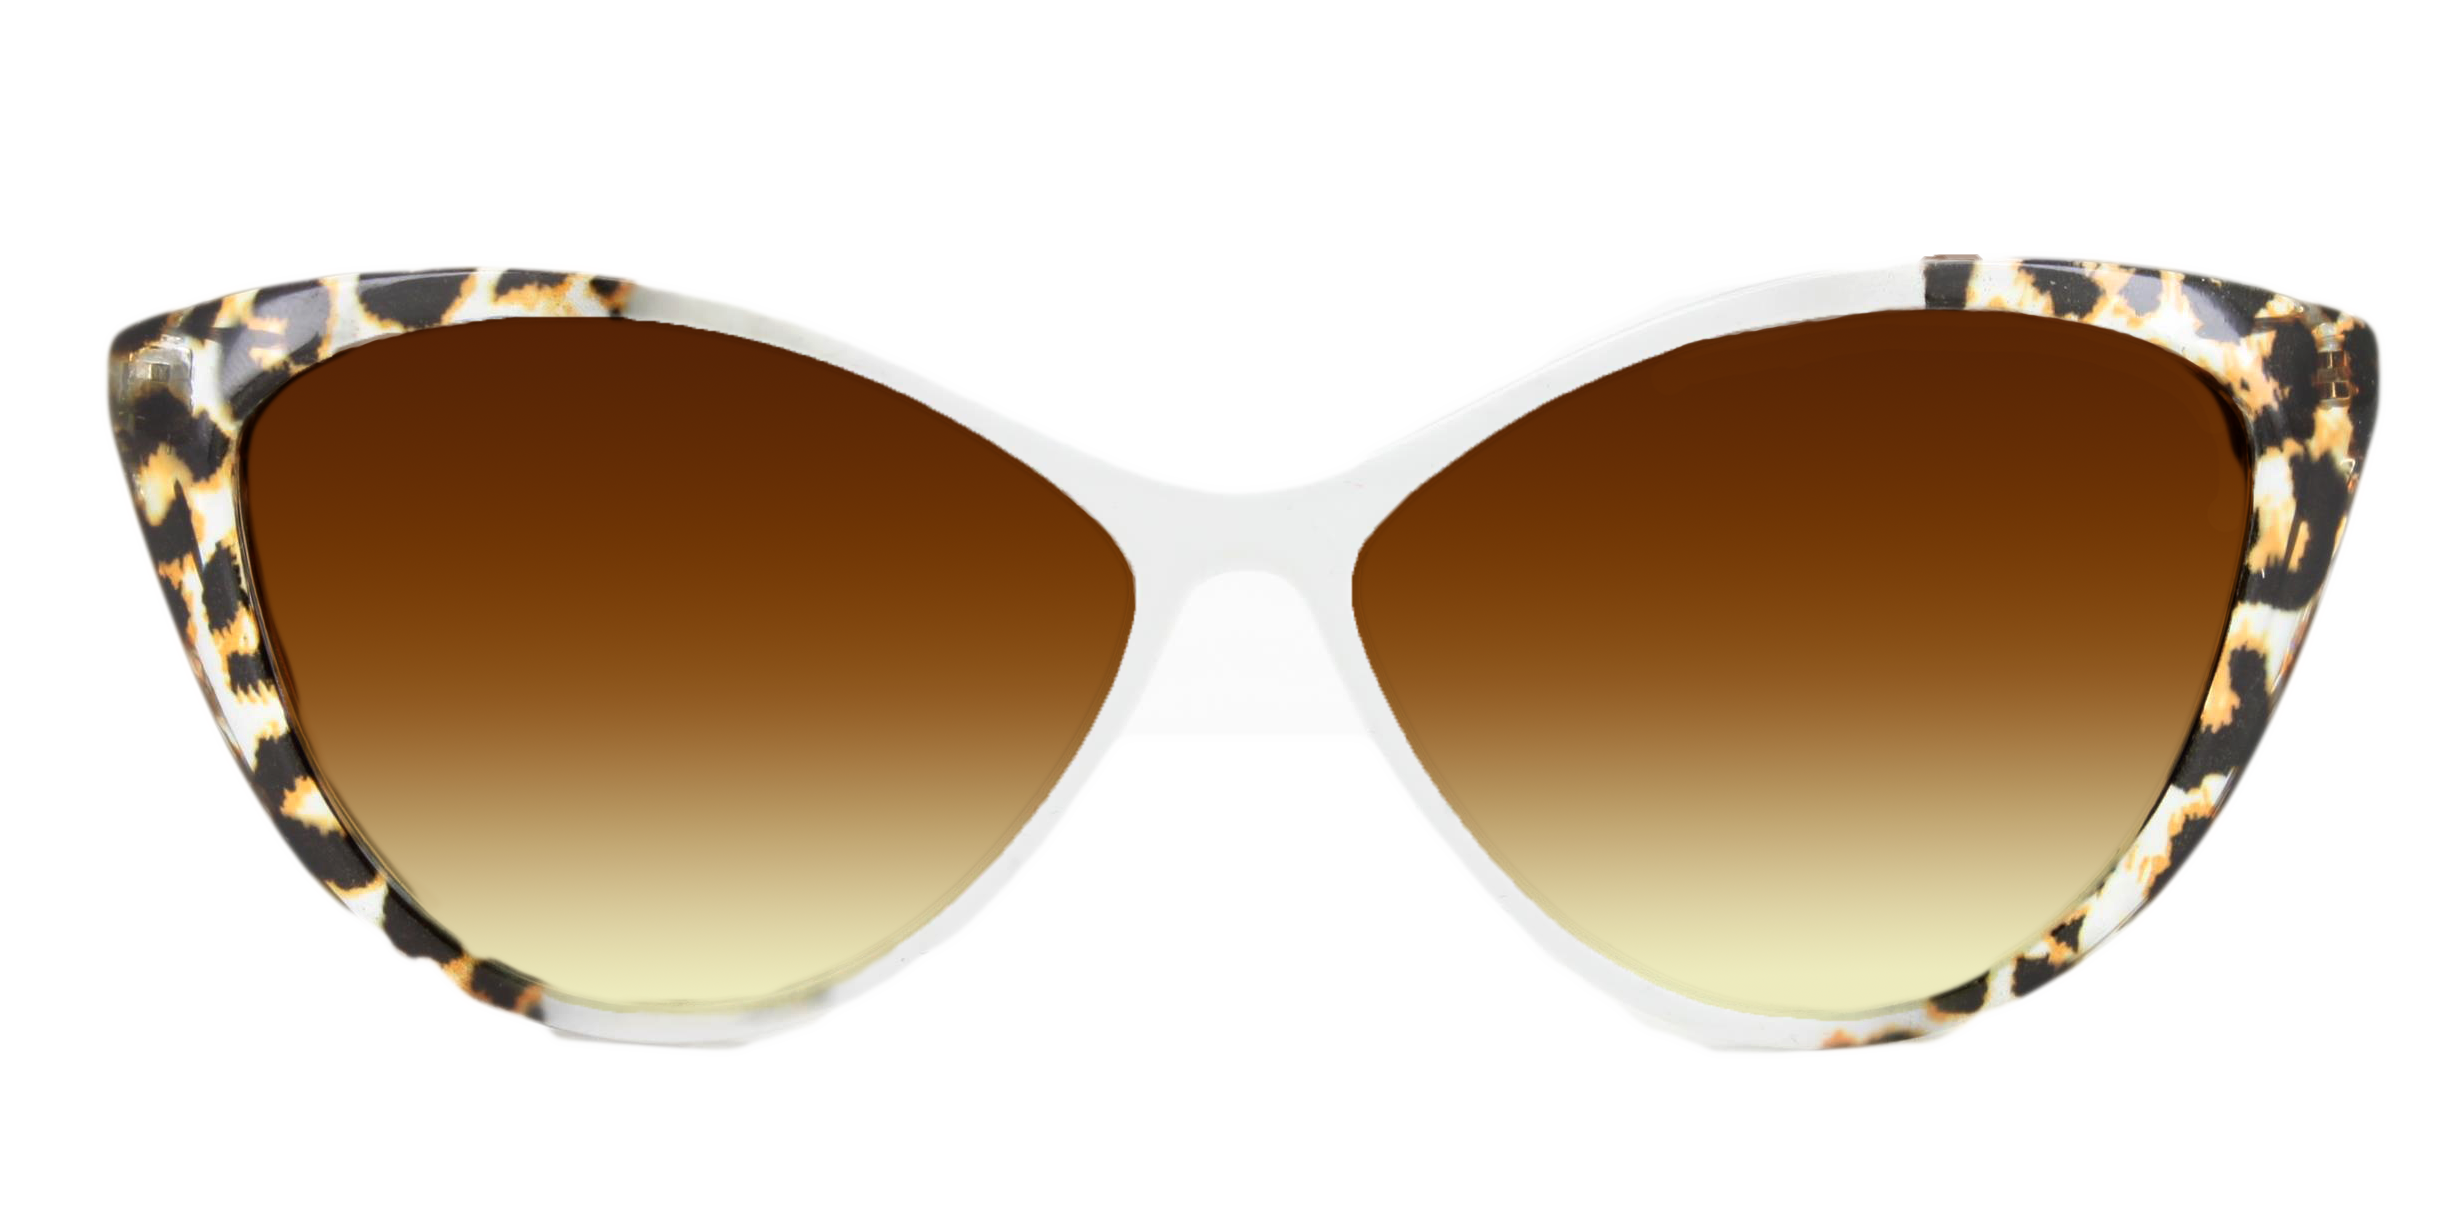 Fun And Sexy Cat Eye Sunglasses Frames Buy Online